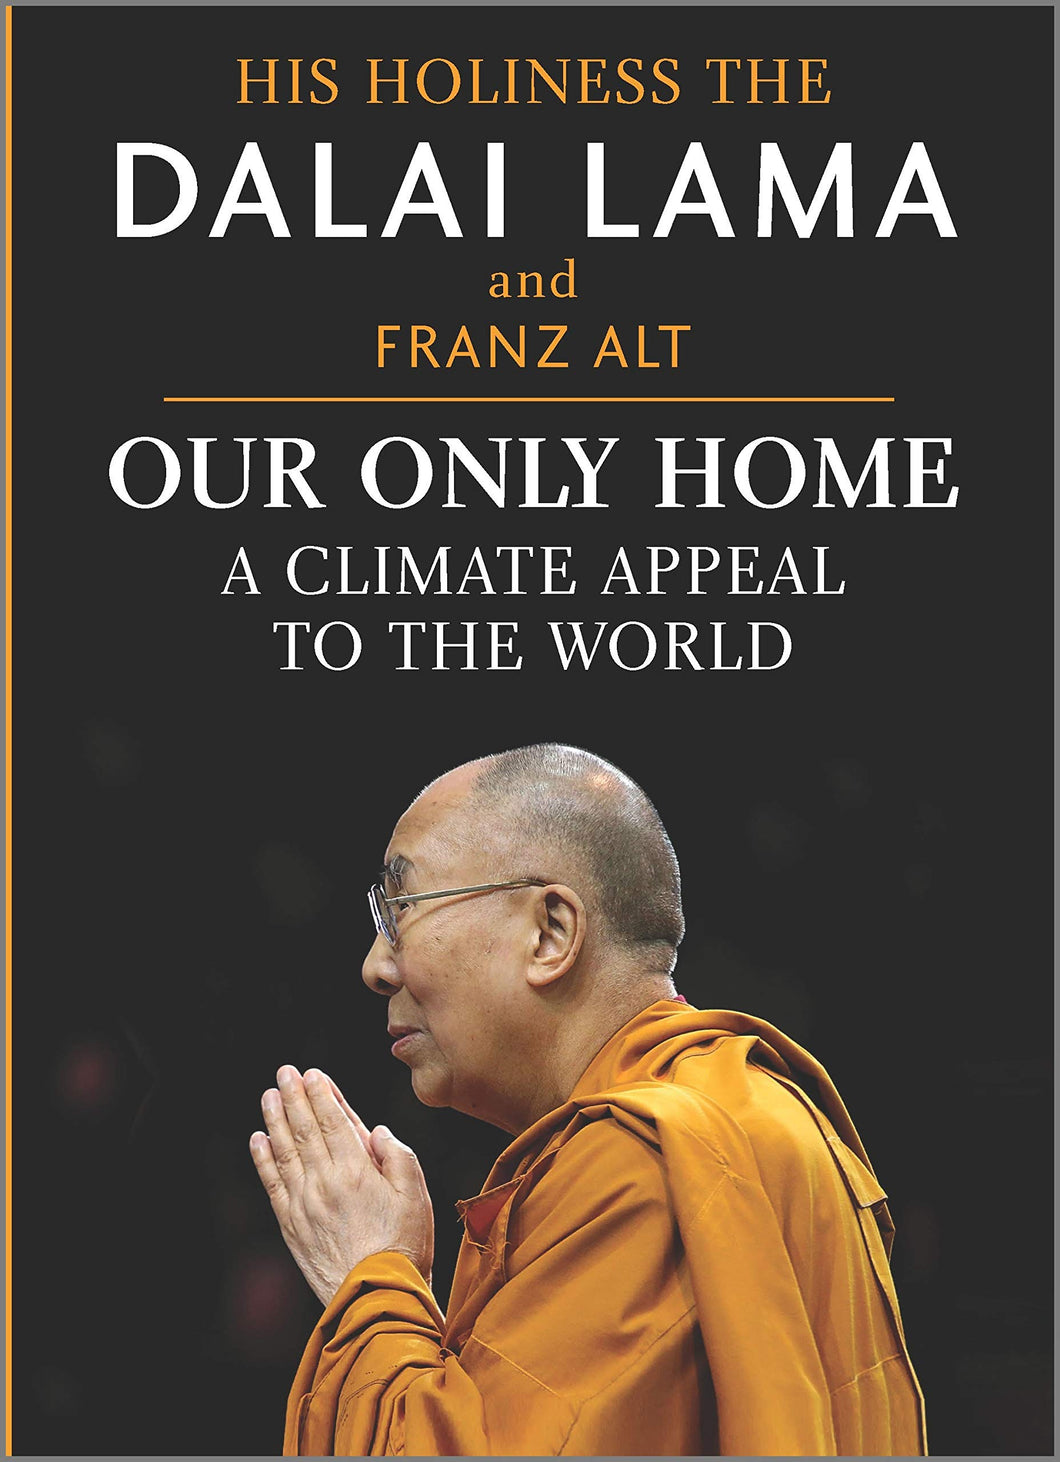 Our Only Home: A Climate Appeal to the World [The Dalai Lama & Franz Alt]